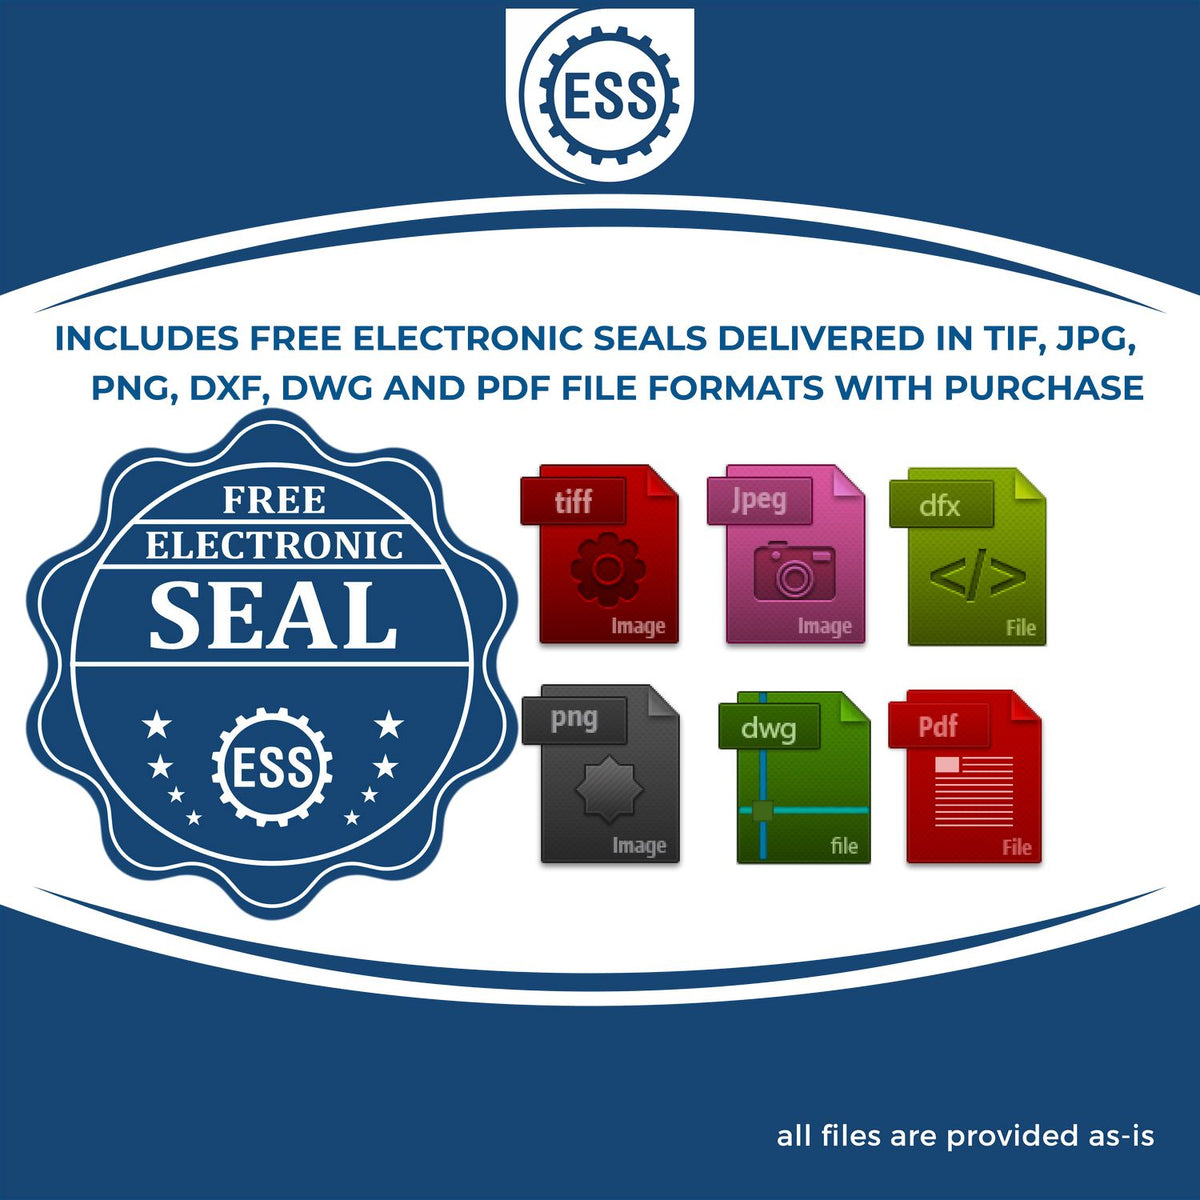 An infographic for the free electronic seal for the Guam Geologist Desk Seal illustrating the different file type icons such as DXF, DWG, TIF, JPG and PNG.